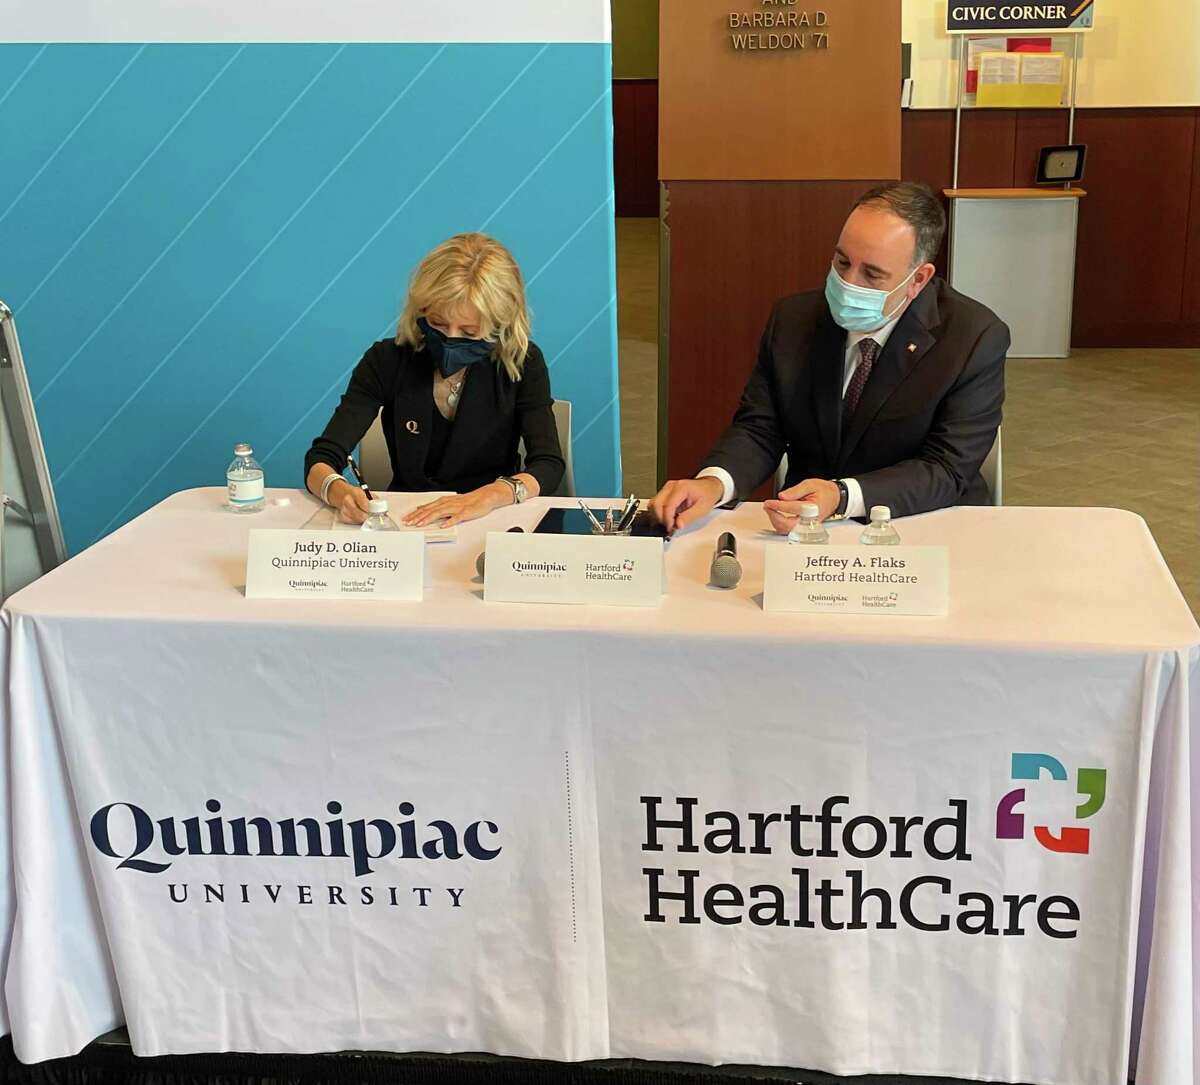 Quinnipiac University President Judy D. Olian, left, and Hartford Healthcare CEO Jeffrey Flaks, right, sign an agreement solidifying a partnership to expand educational programs Jan. 19, 2022 in North Haven.